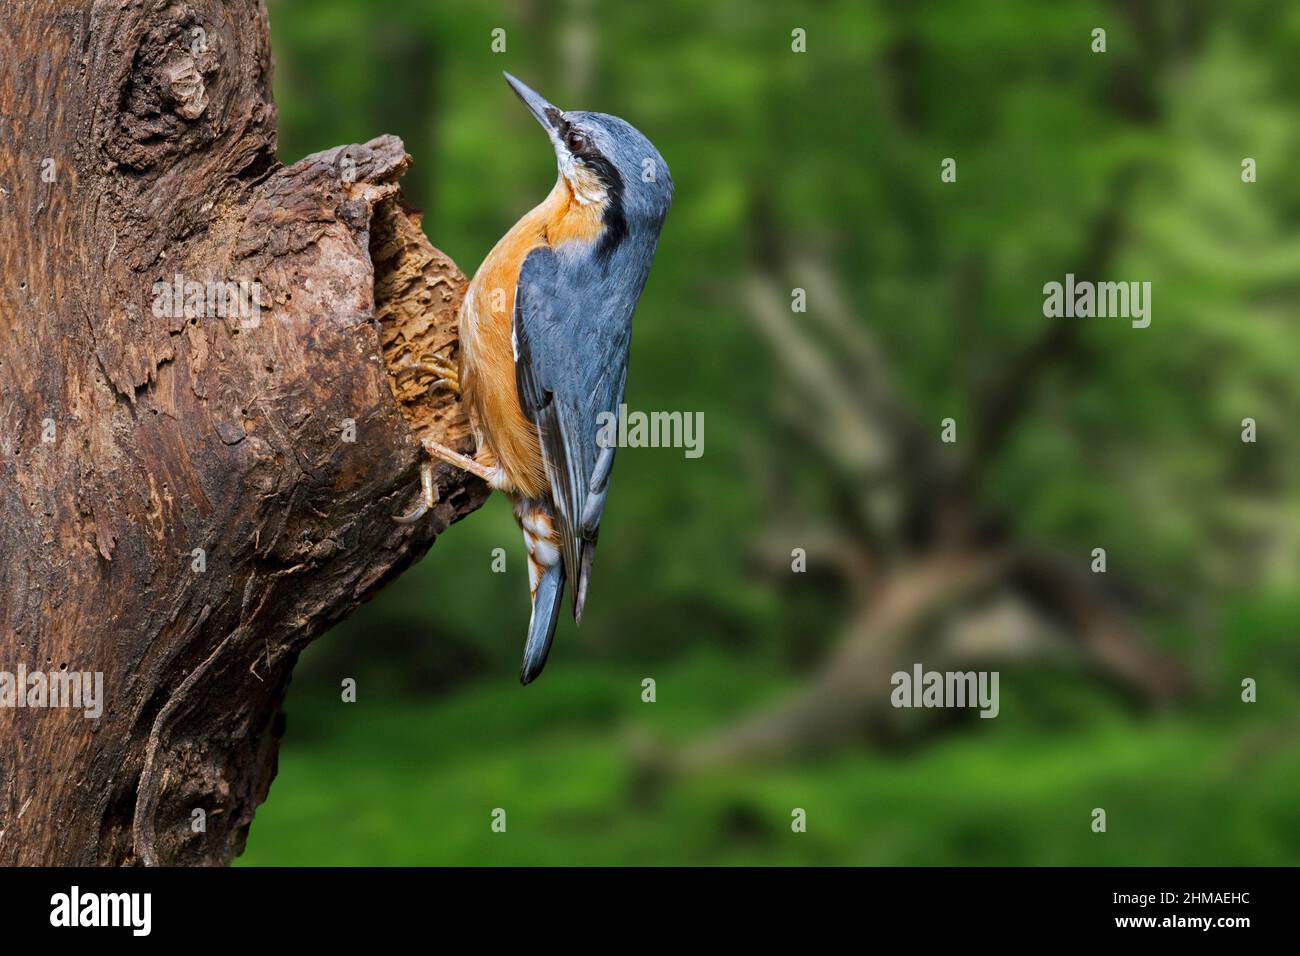 Eurasian nuthatch / wood nuthatch (Sitta europaea) foraging on tree trunk in forest Stock Photo